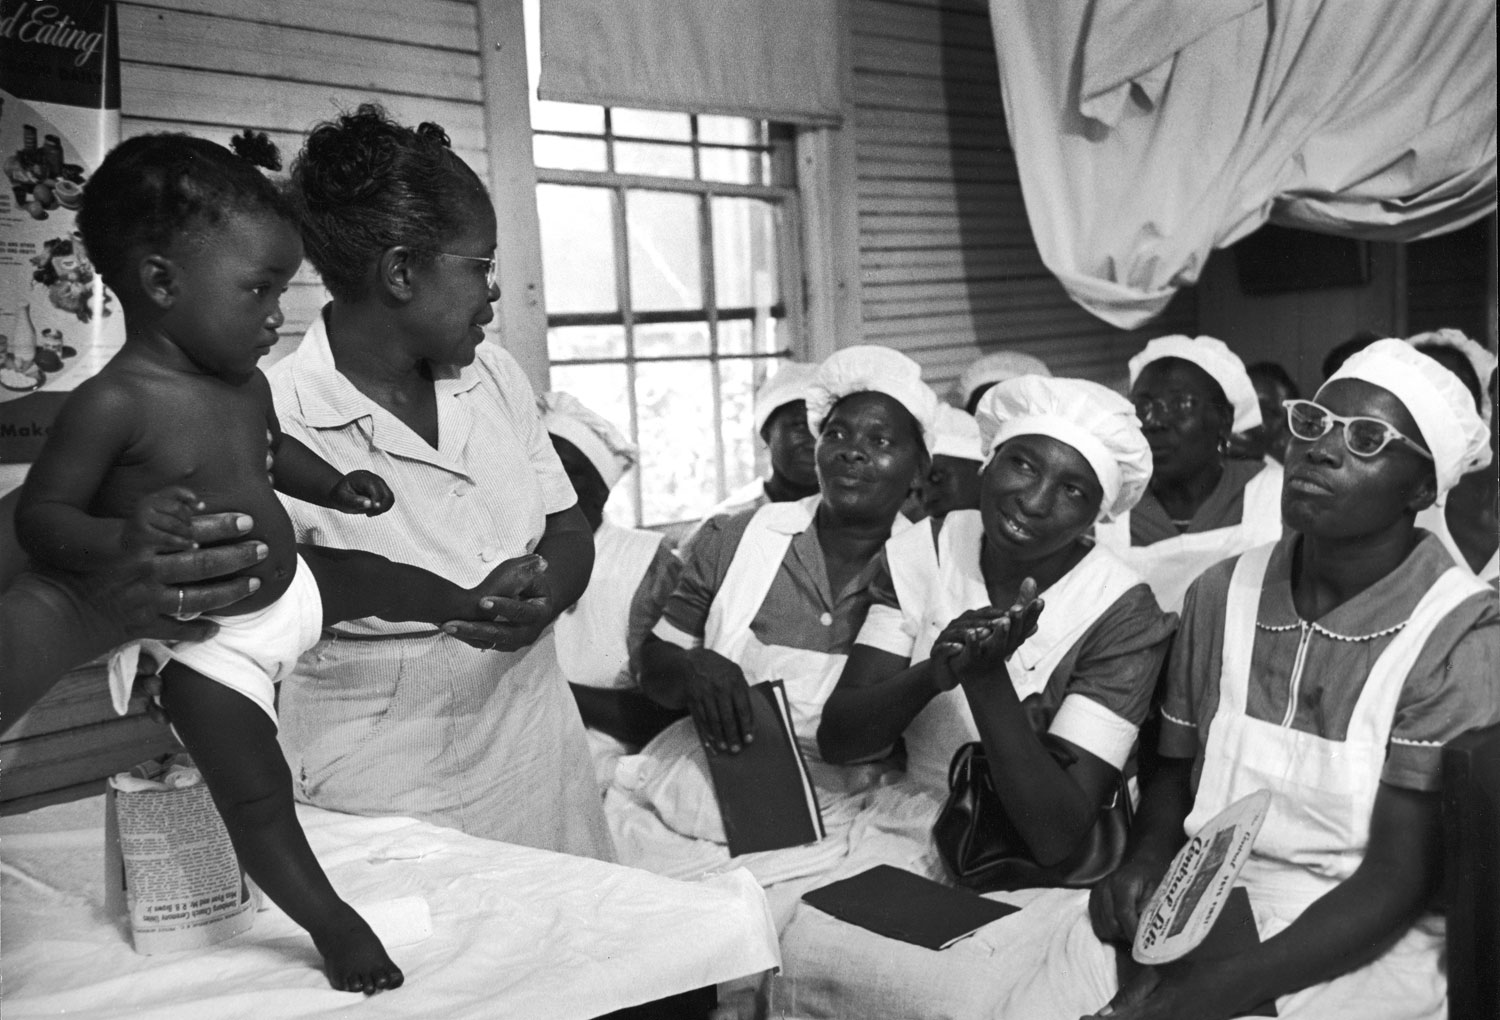 Caption from LIFE. Teaching a midwife class, Maude shows how to examine a baby for abnormalities. She conducts some 84 classes, helps coach about 12 new midwives each year. ...